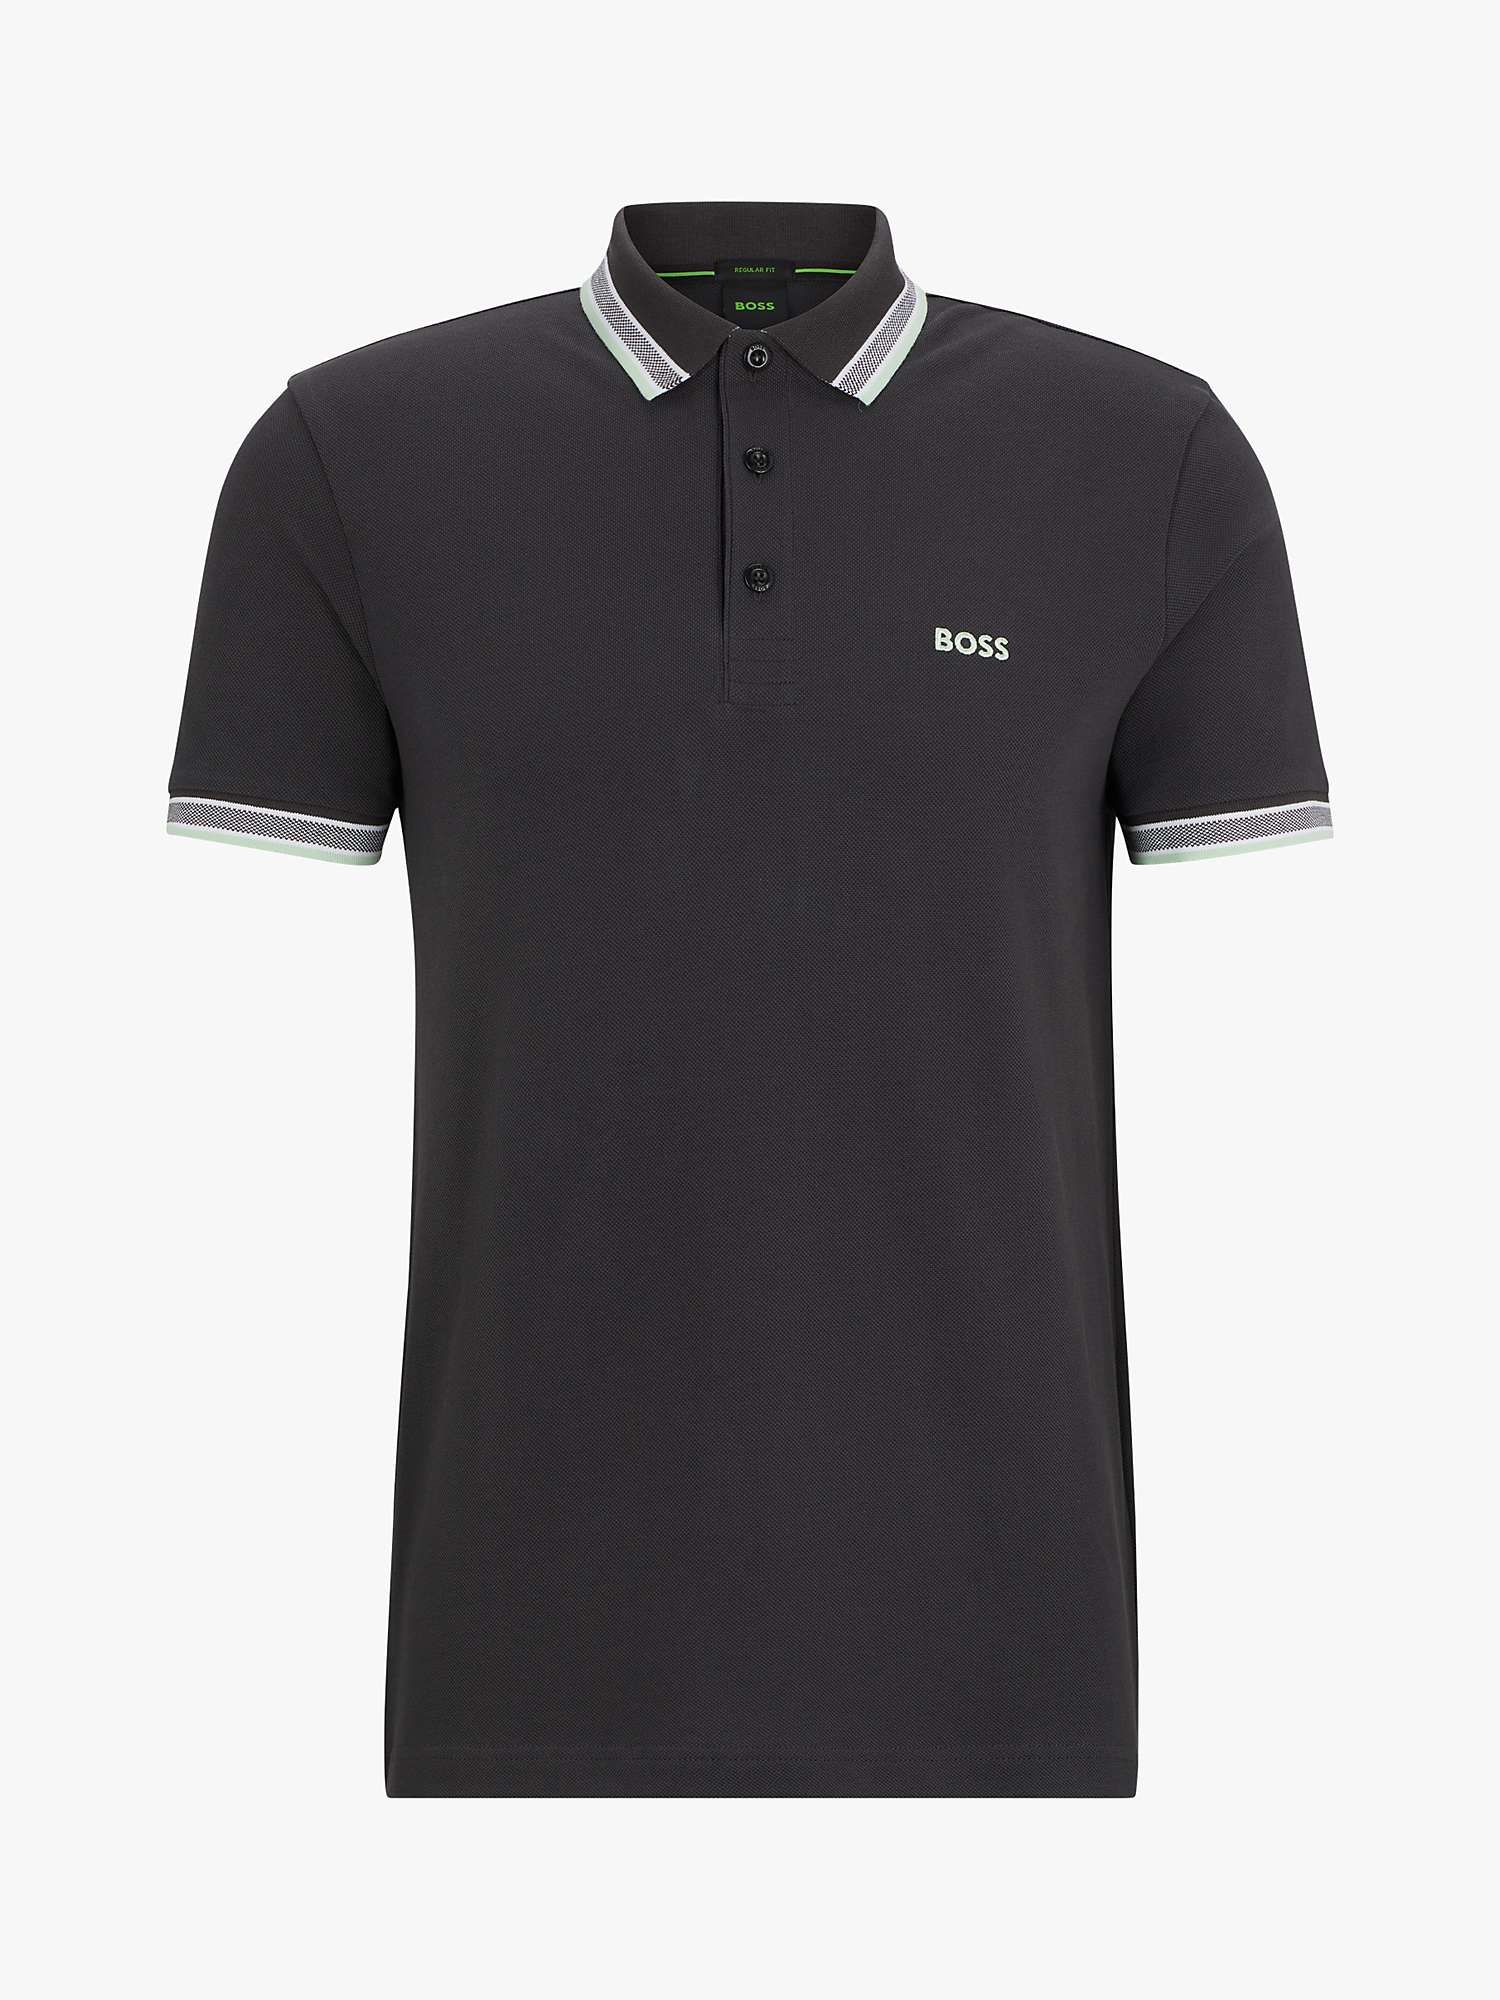 Buy BOSS Paddy Cotton Polo Top, Charcoal Online at johnlewis.com